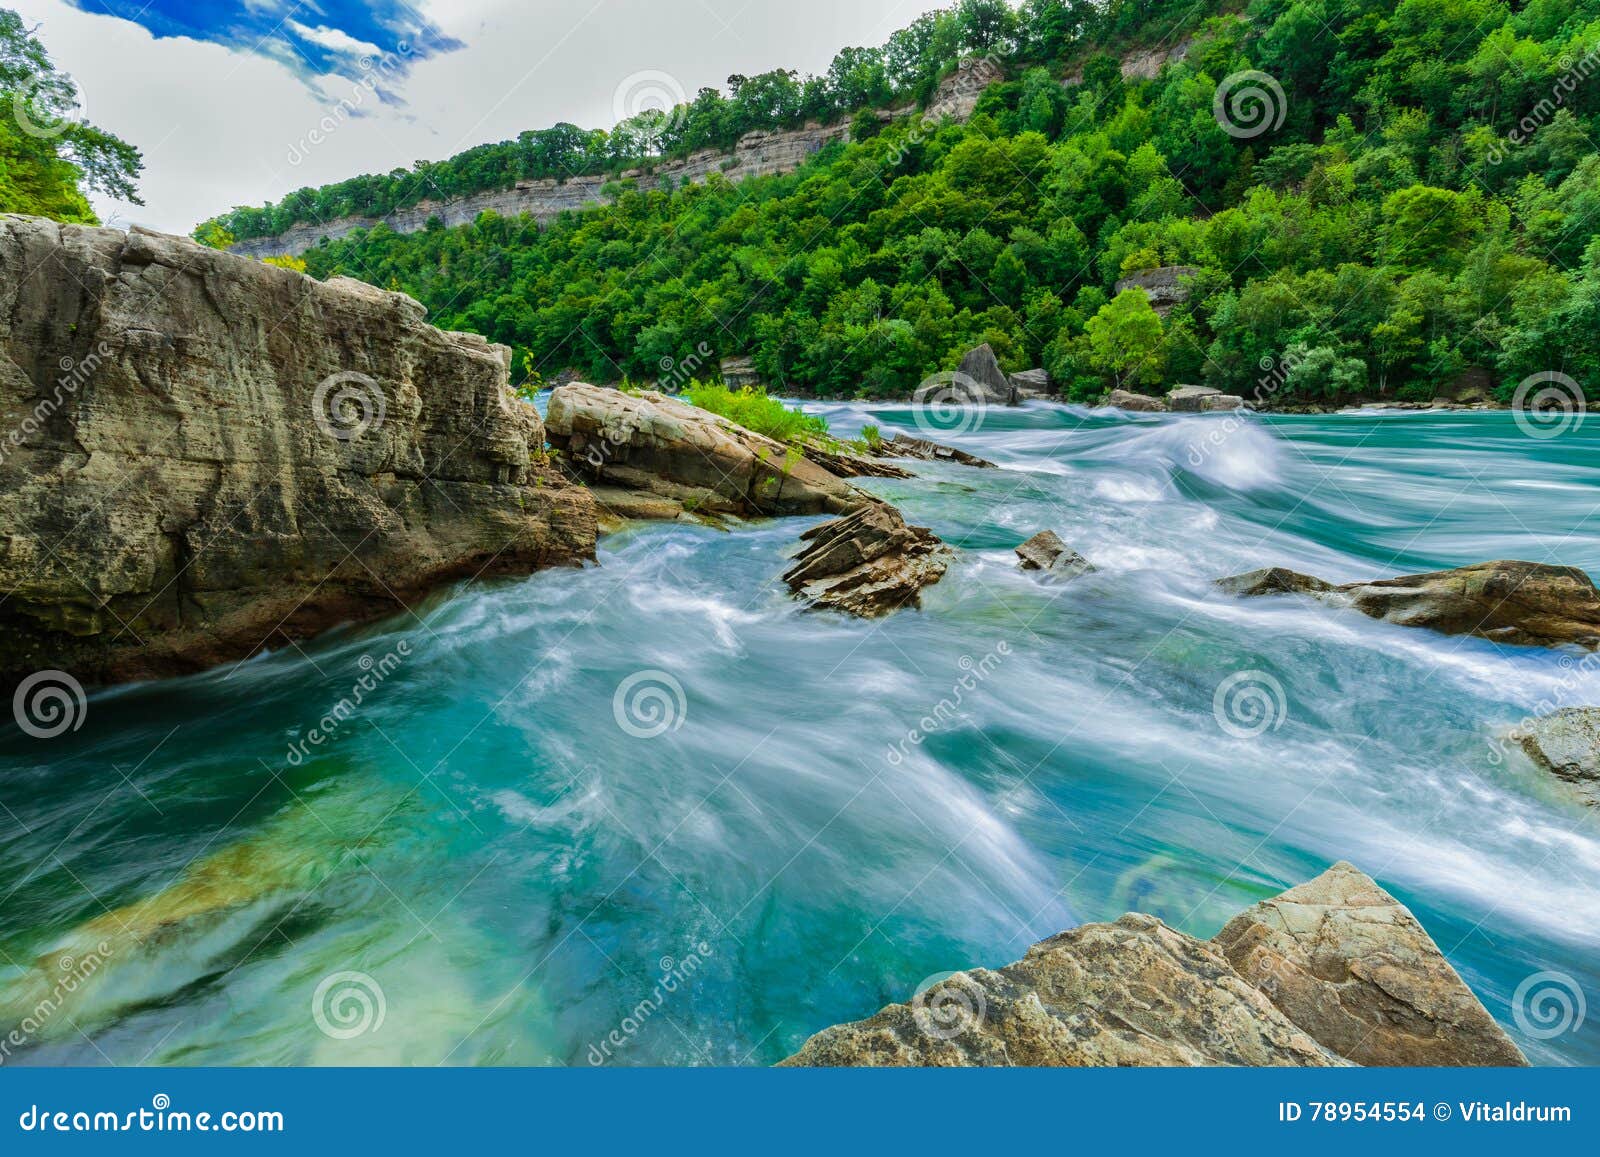 Gorgeous Natural Landscape View of Niagara Falls River with Big Rocks ...